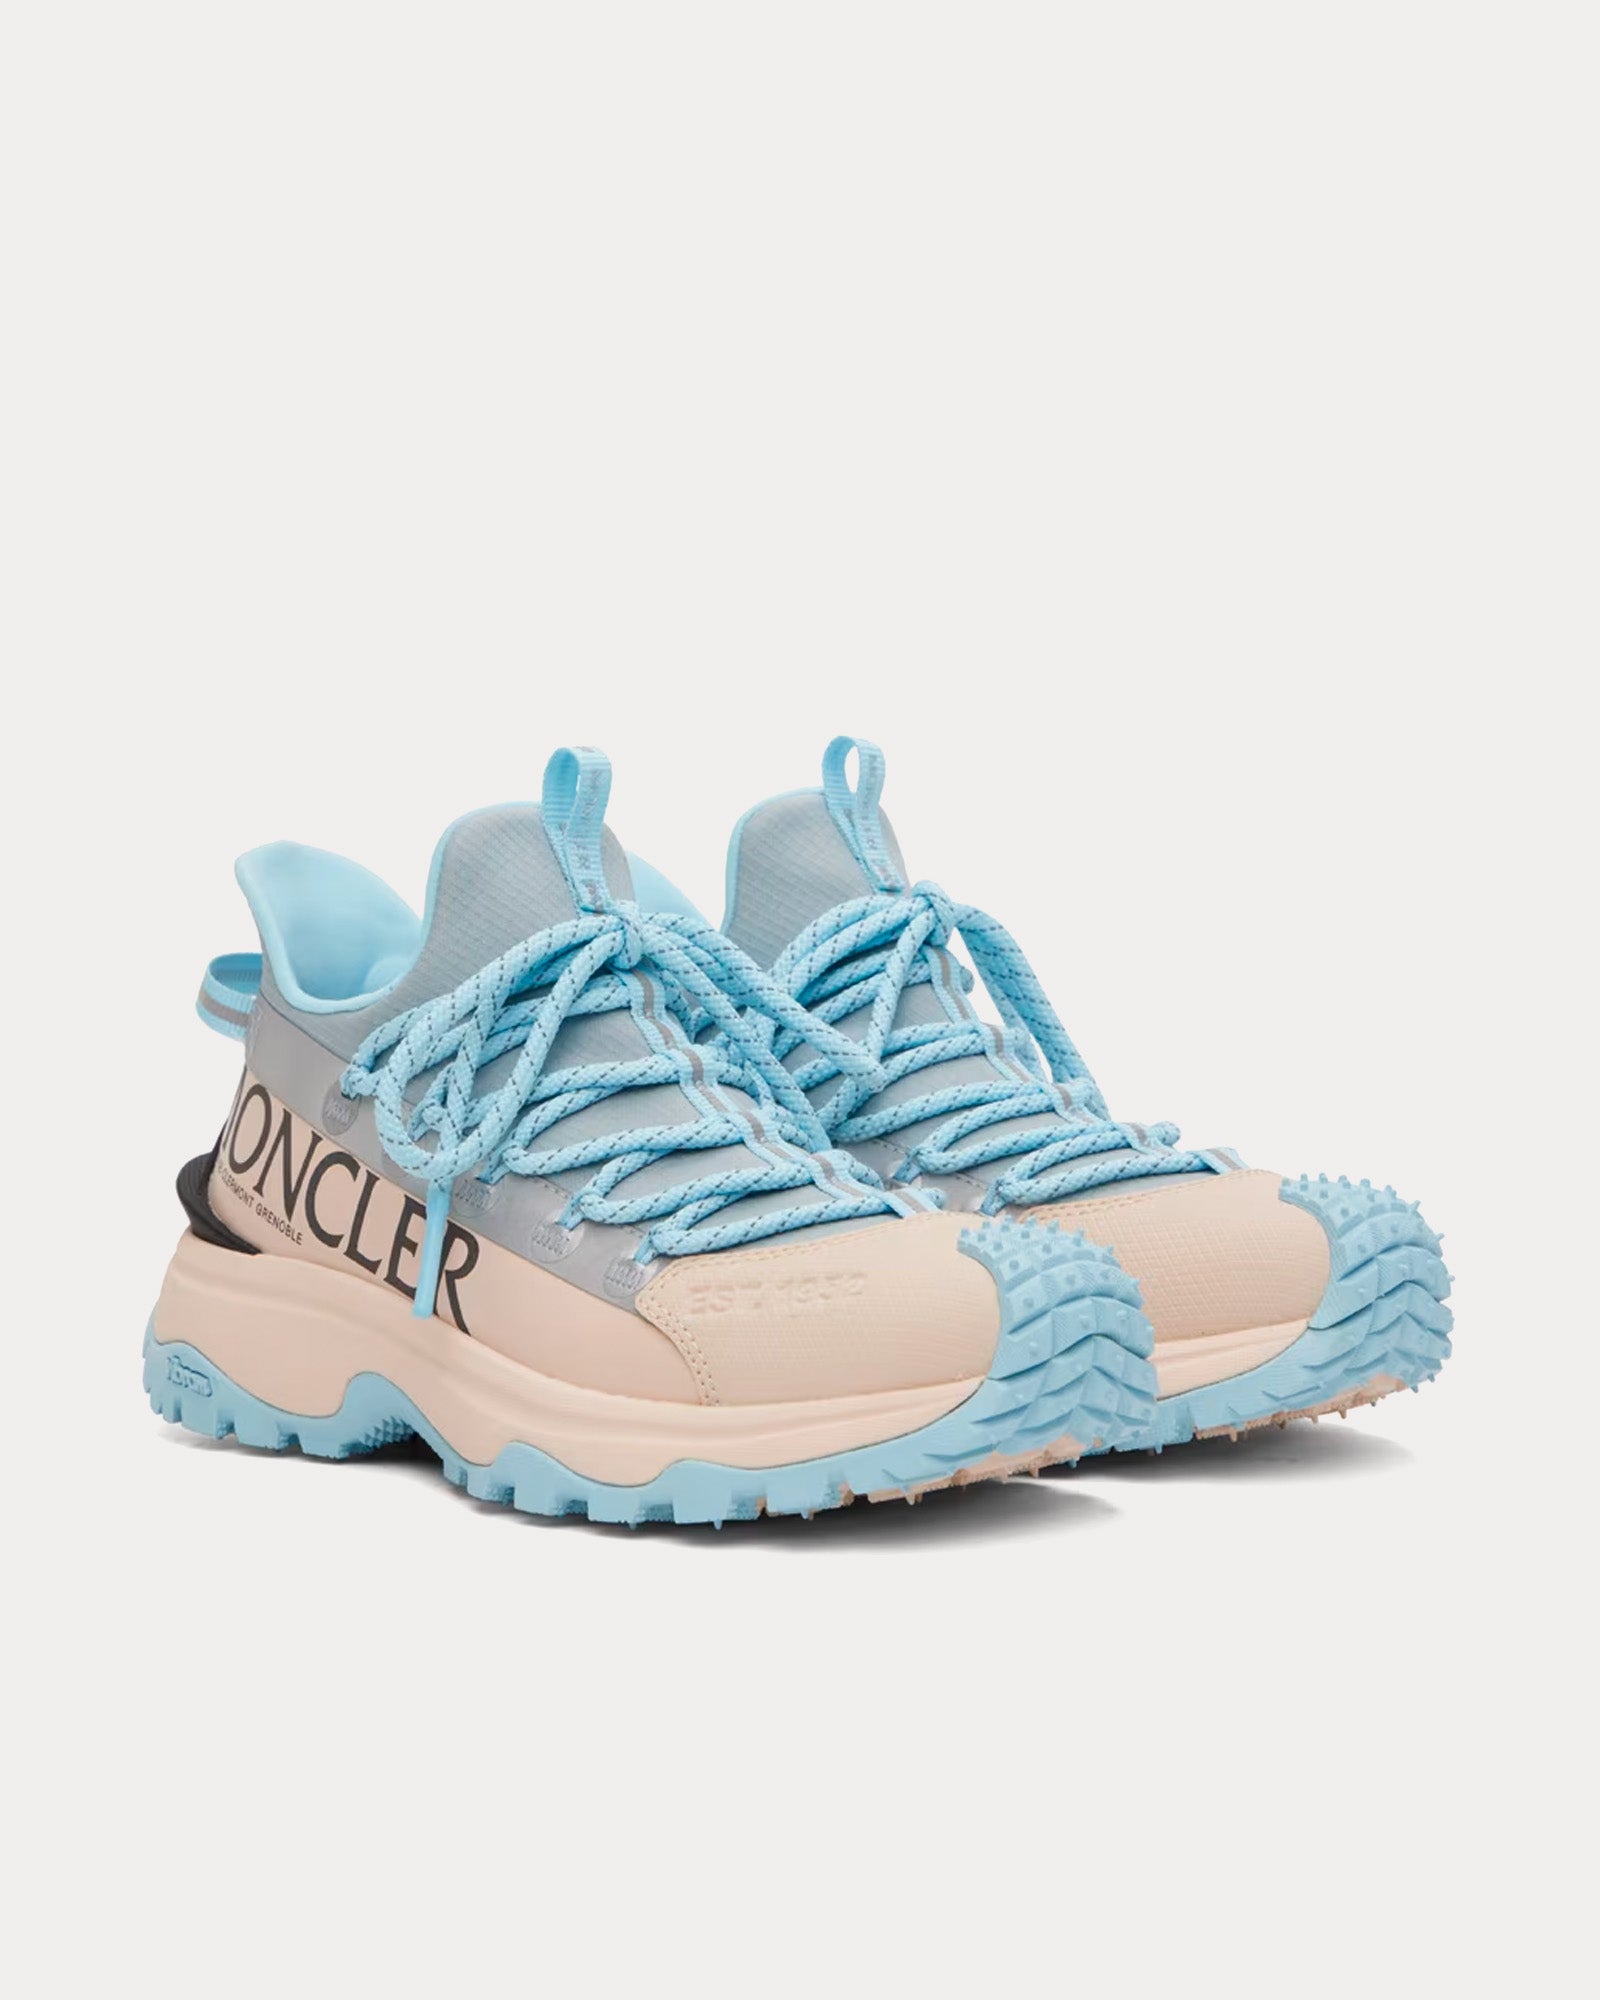 Moncler - Trailgrip Lite 2 White / Blue Low Top Sneakers